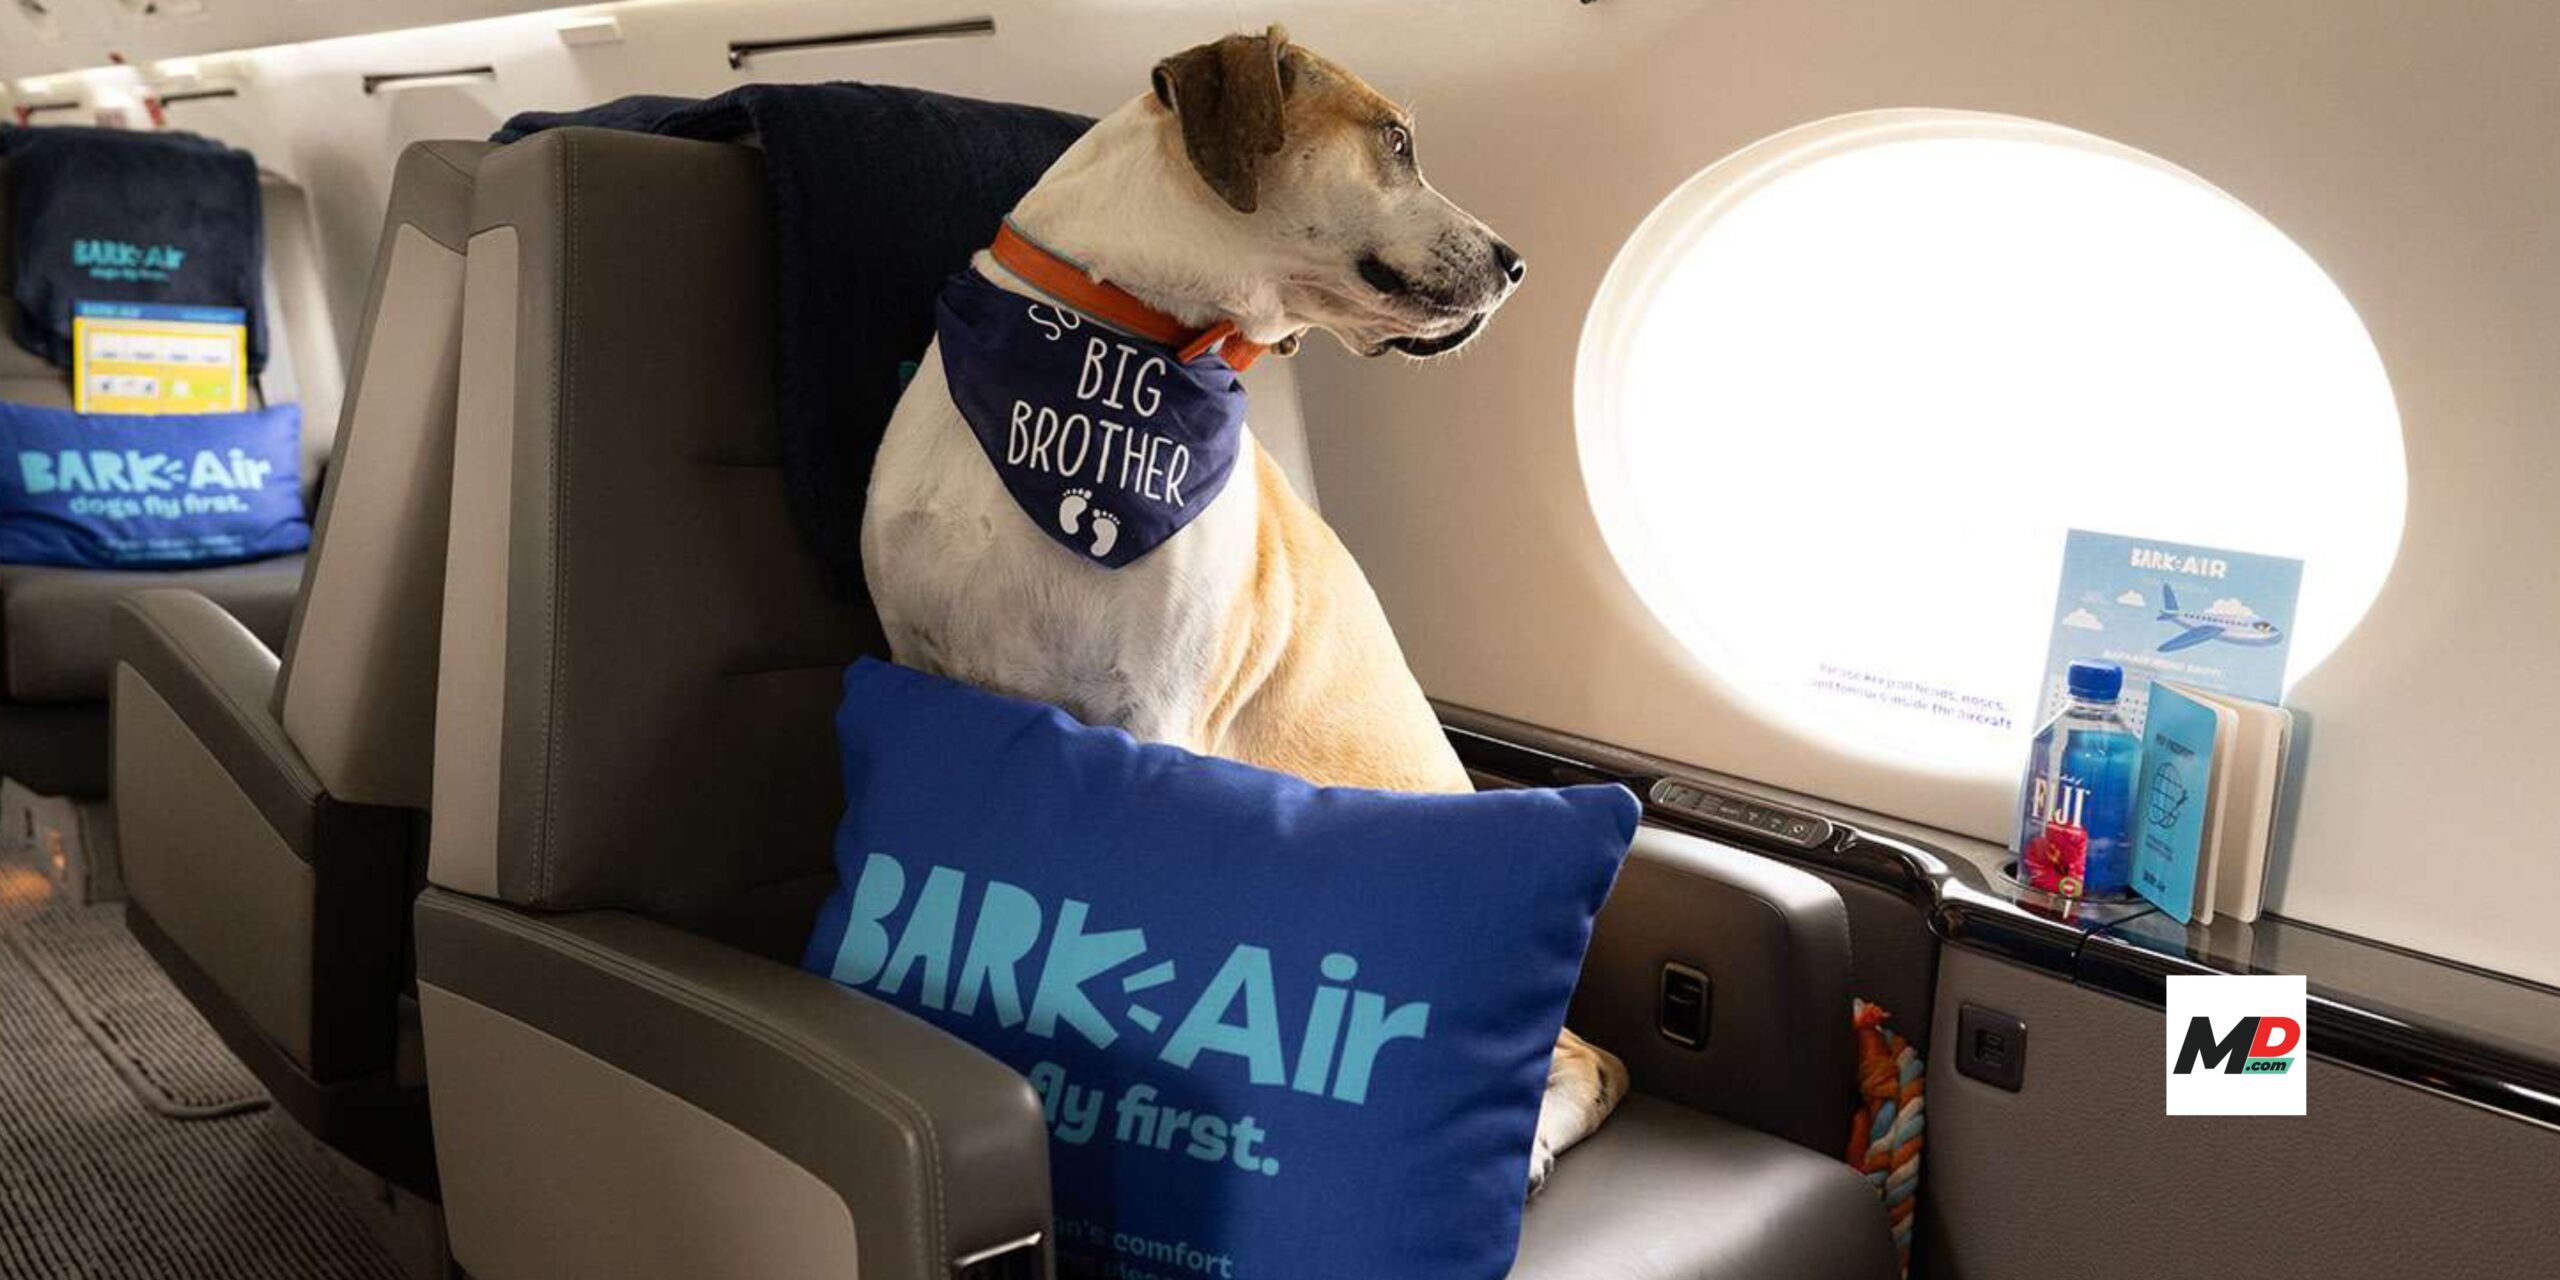 Bark Air puts the ‘wow’ in bow-wow